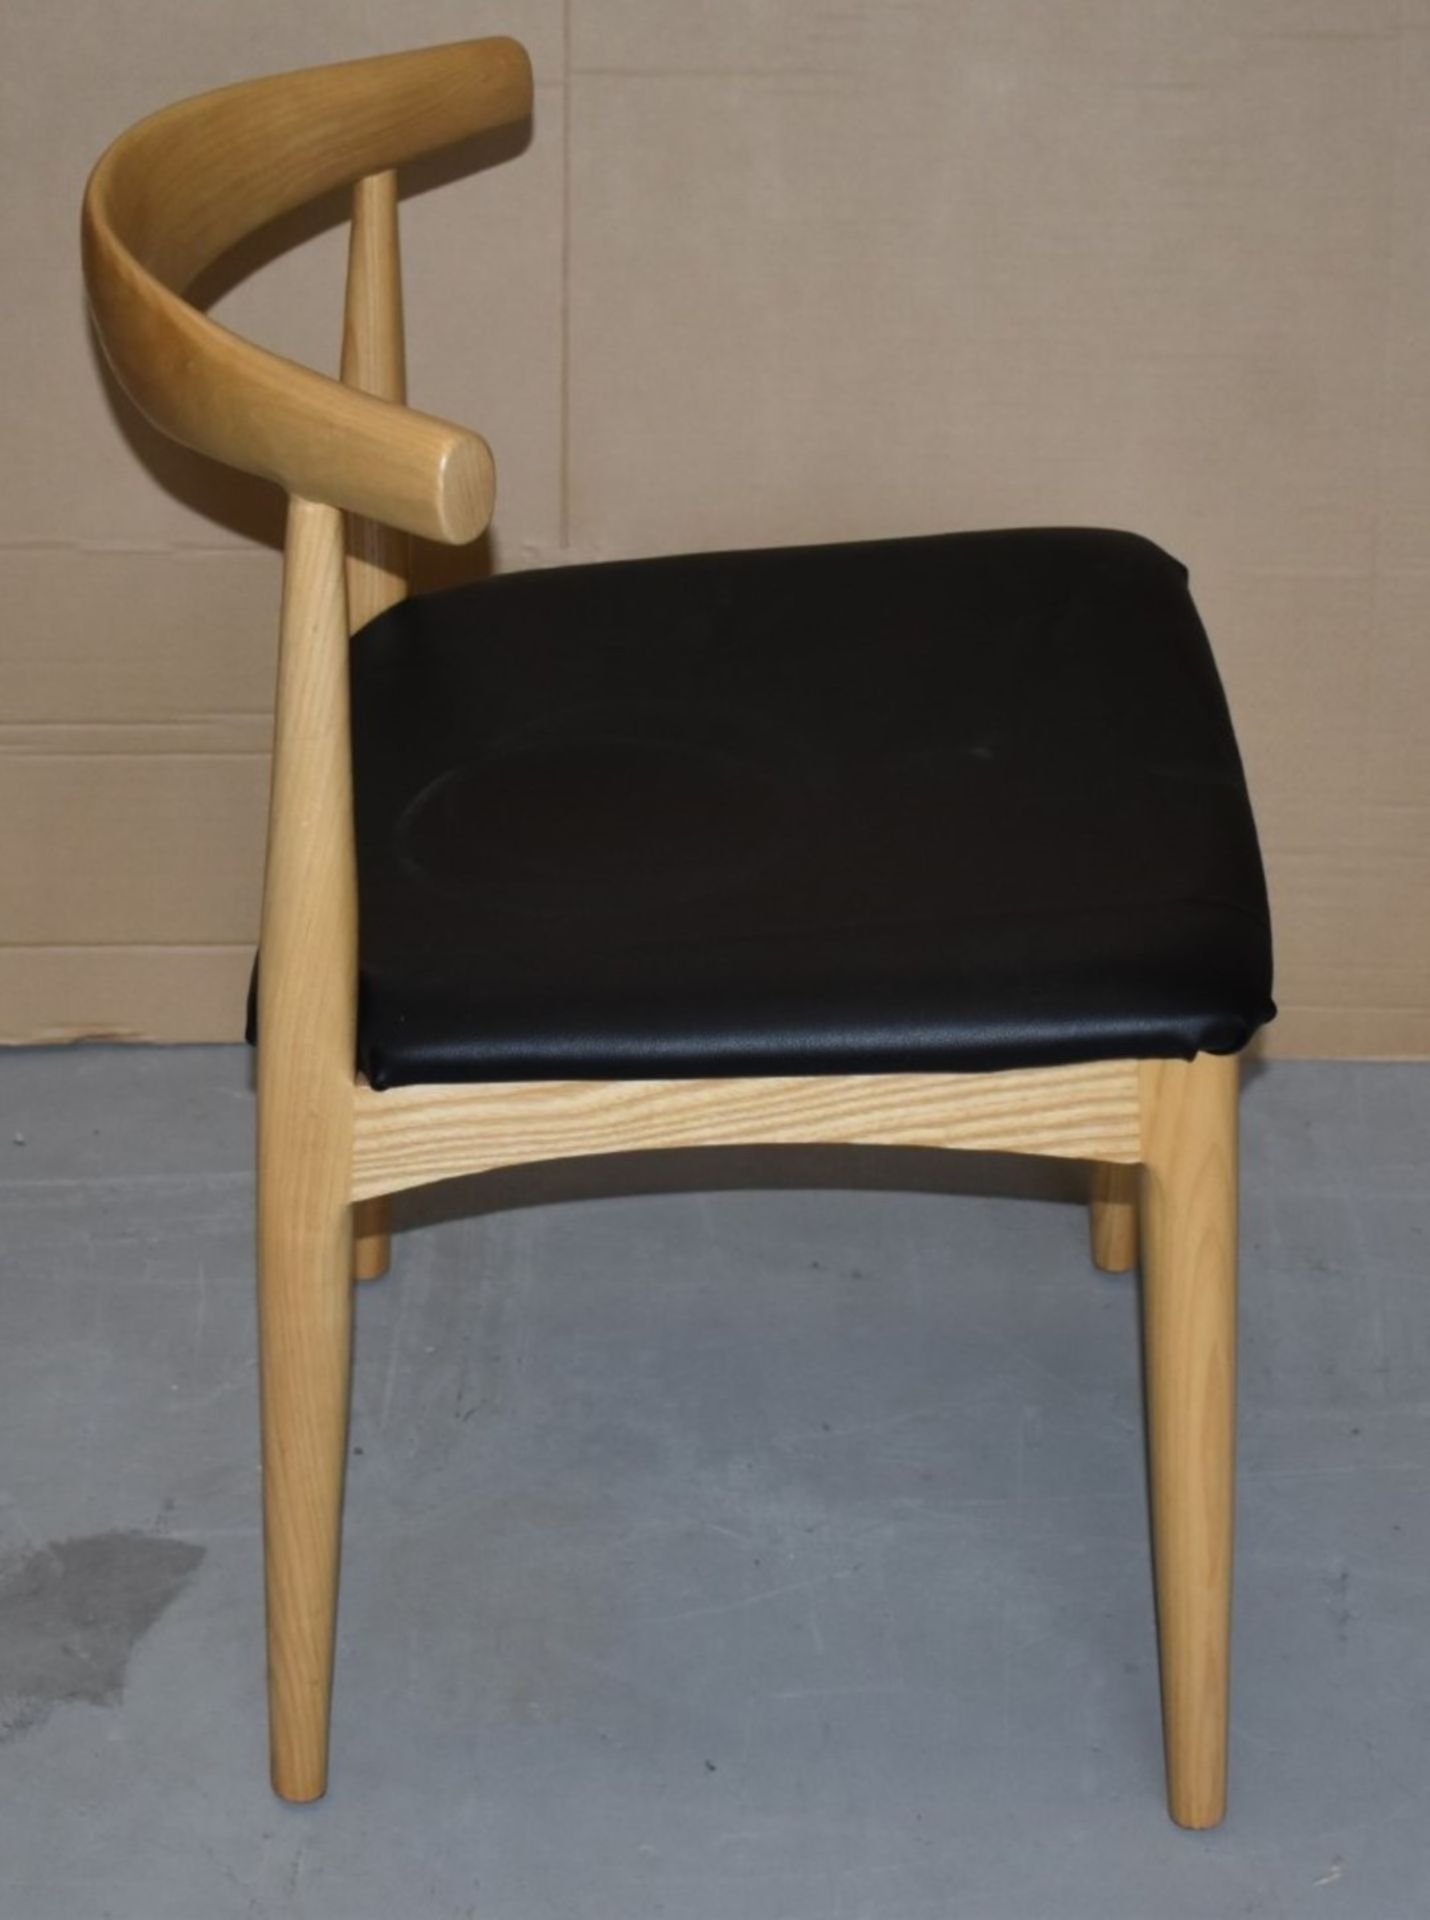 1 x Hans Wegner Inspired Elbow Chair - Solid Wood Chair With Light Stain Finish and Black Seat Pad - - Image 5 of 5